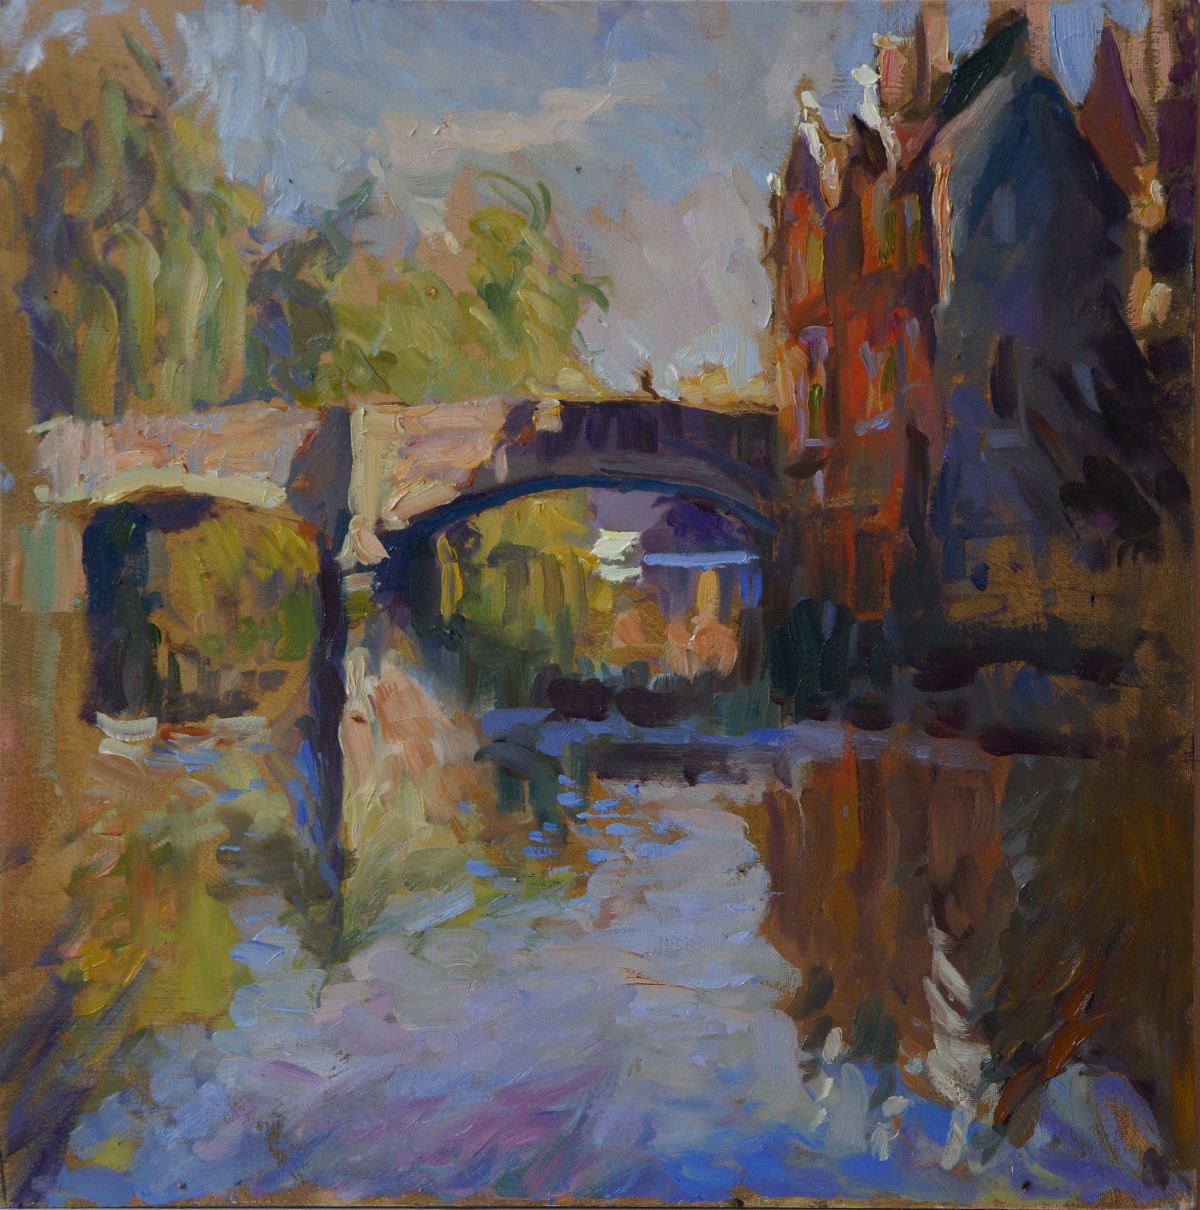 Rob Pointon, 'The Day After the Monet Lecture', St. Georges Bridge, Oil, 40x40cm, <a href="http://www.paintout.org/artists/rob-pointon#buy">FOR SALE</a>, £650